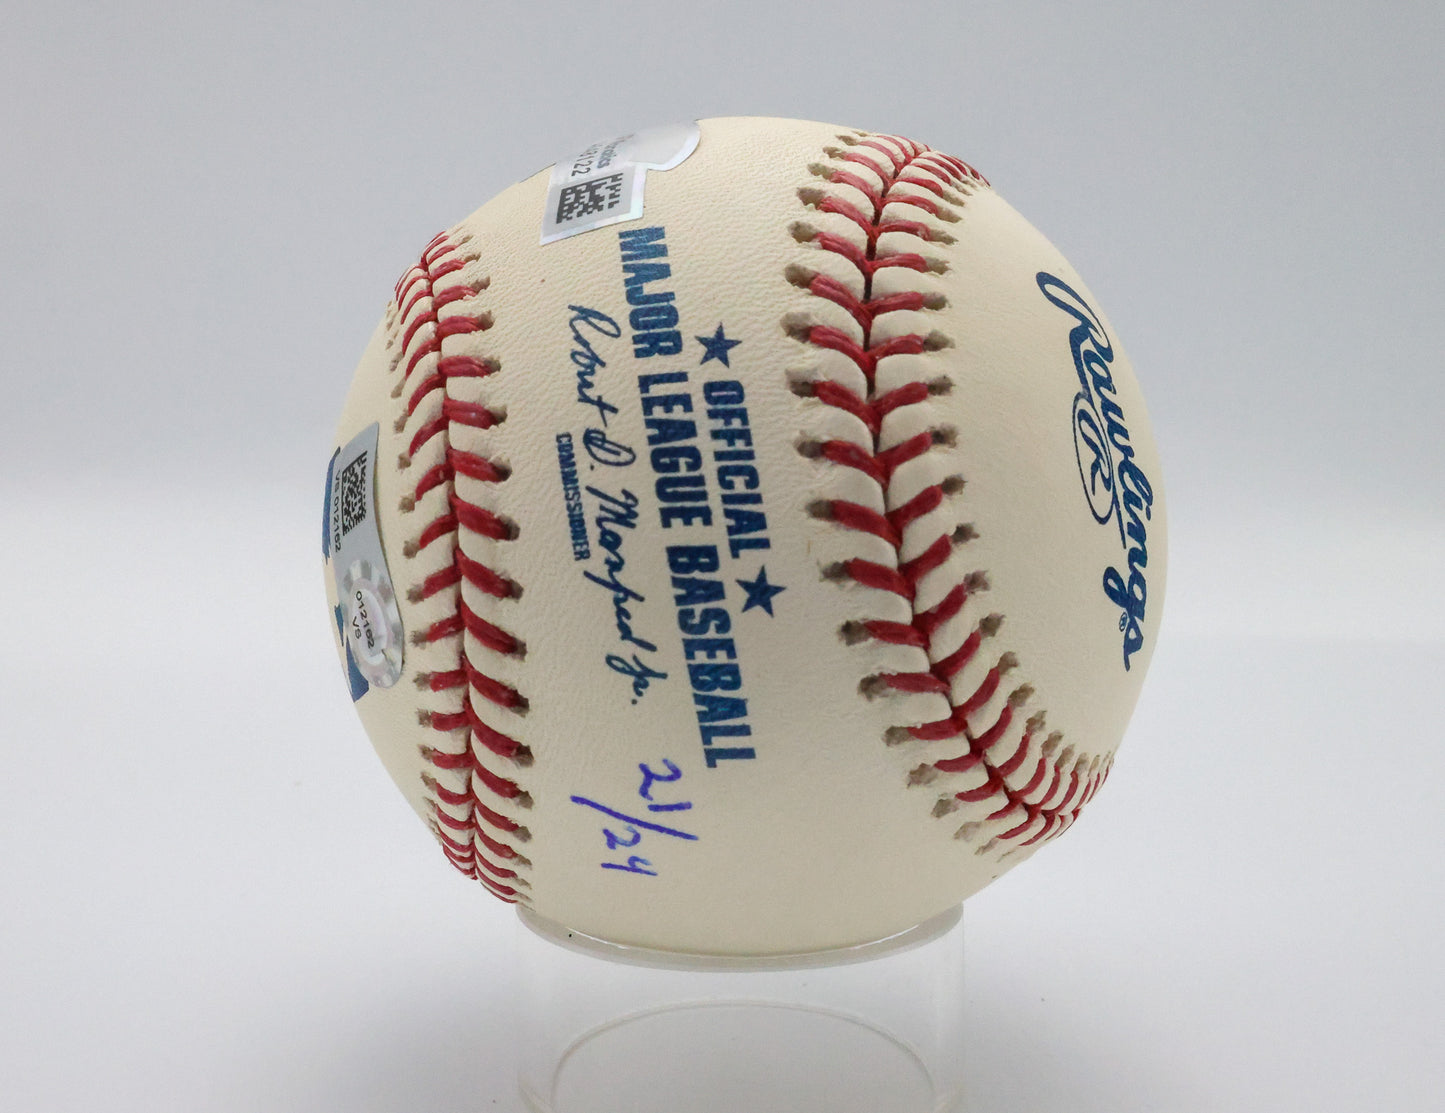 Rodger Clemens Autographed Baseball Five Inscriptions - Limited Edition